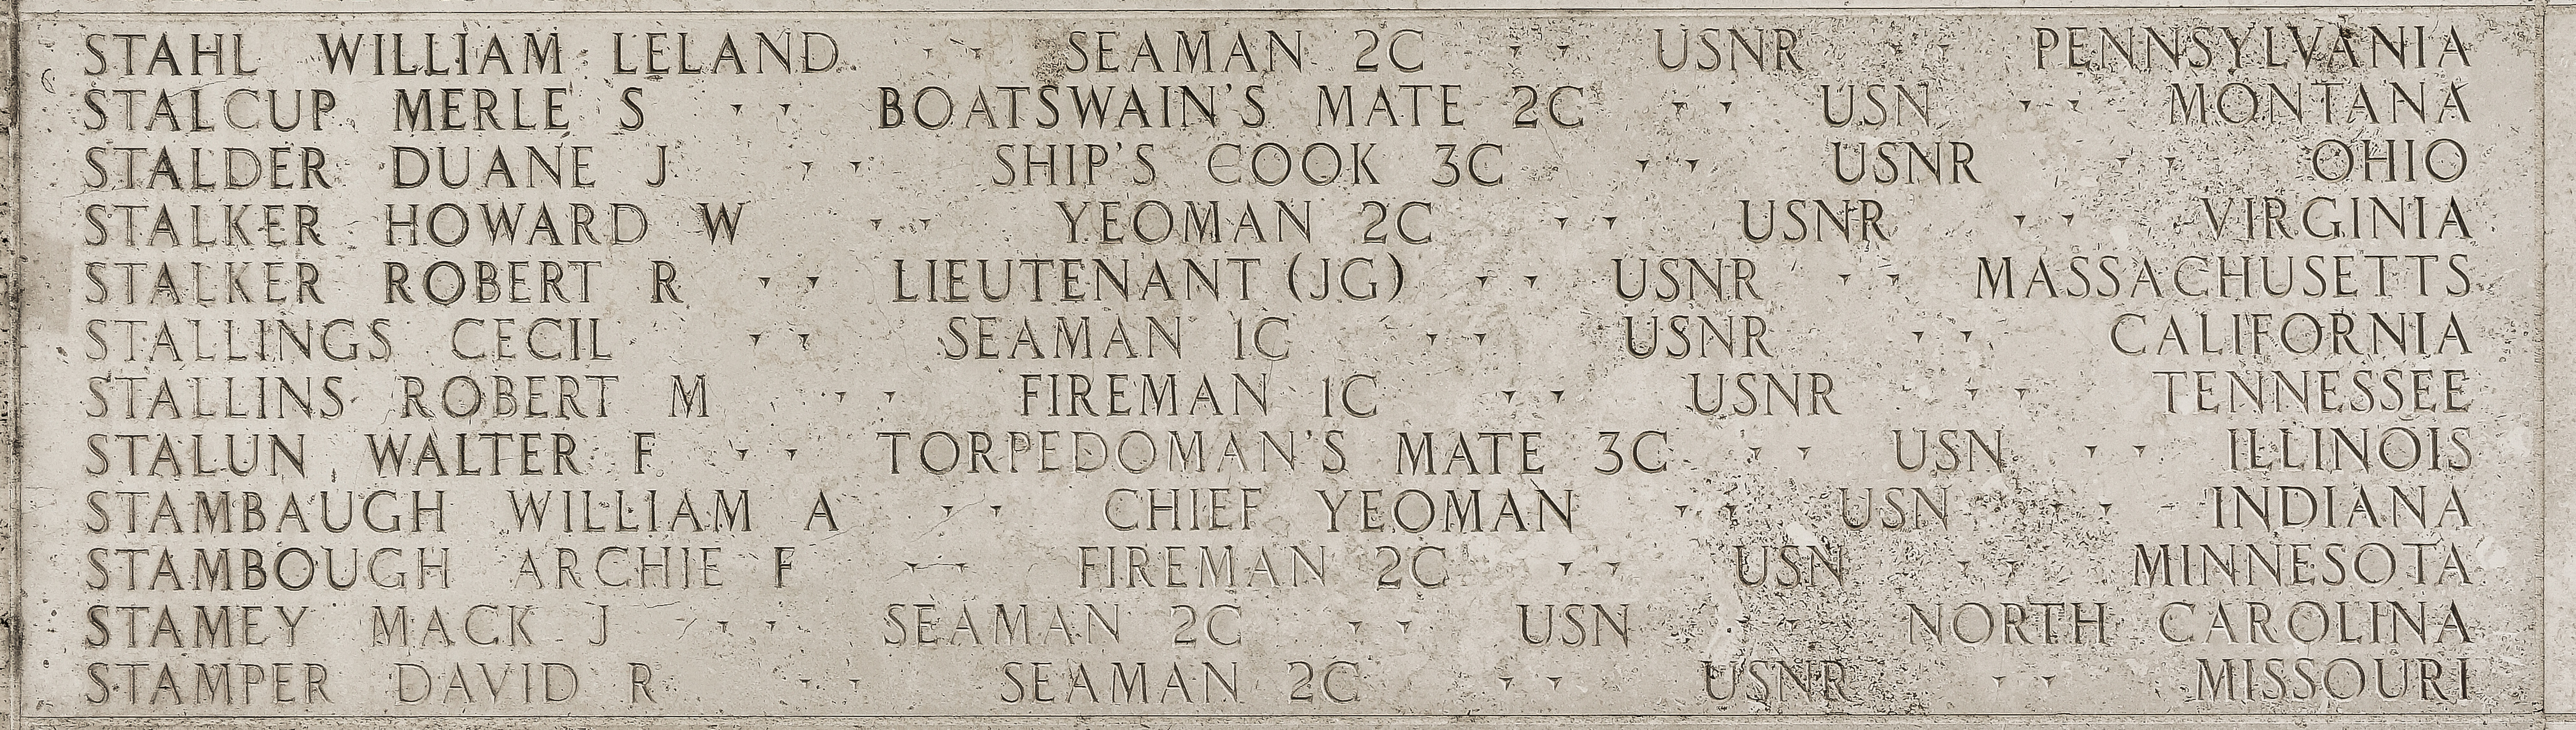 Merle S. Stalcup, Boatswain's Mate Second Class